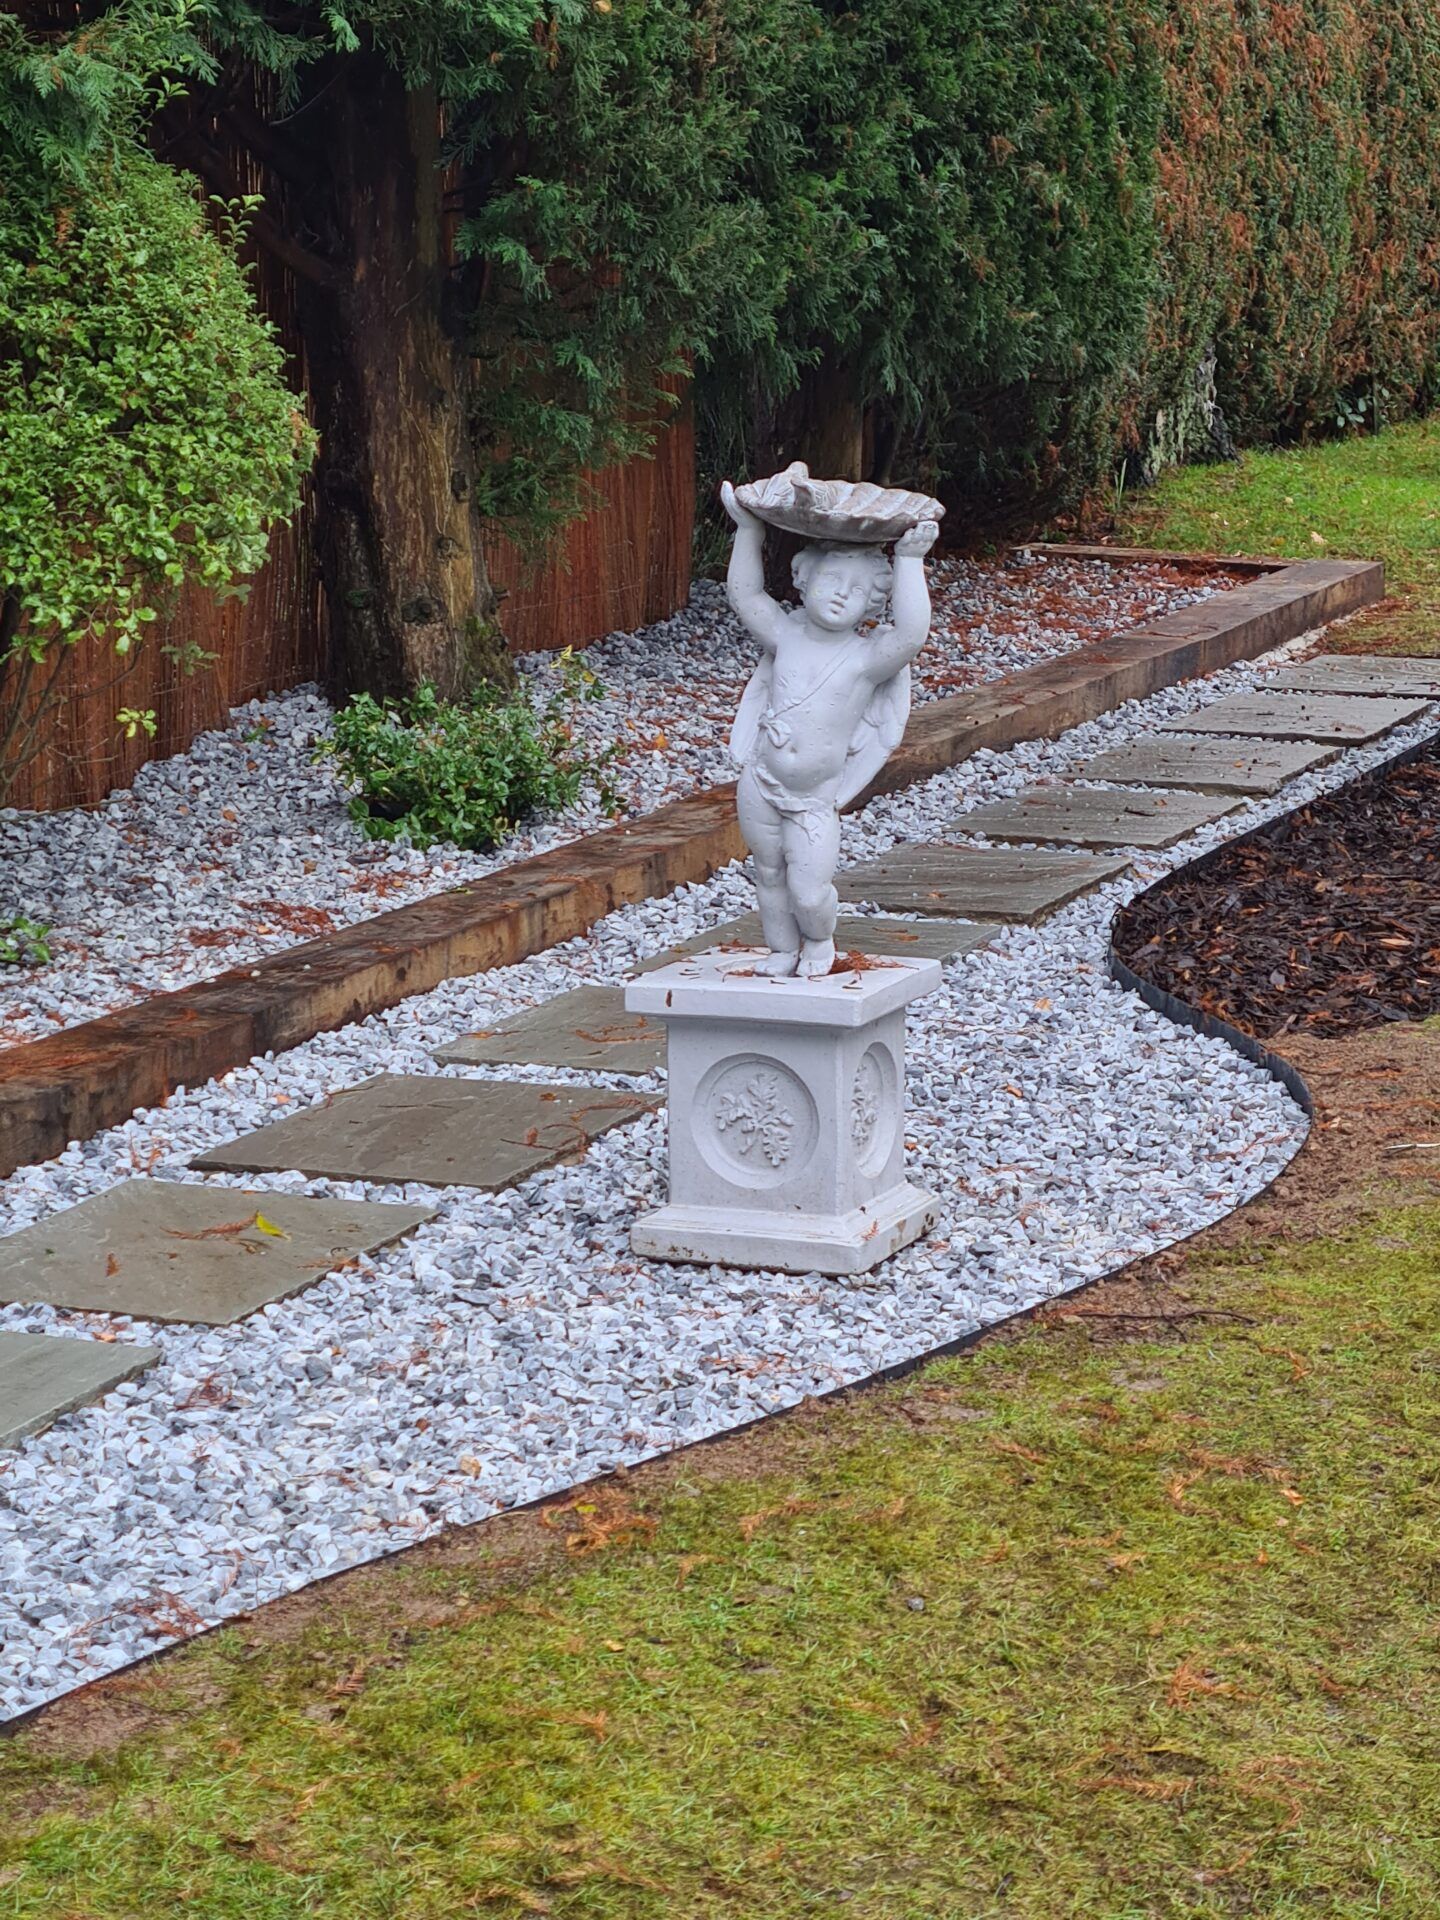 stone and slab pathway with garden ornament.